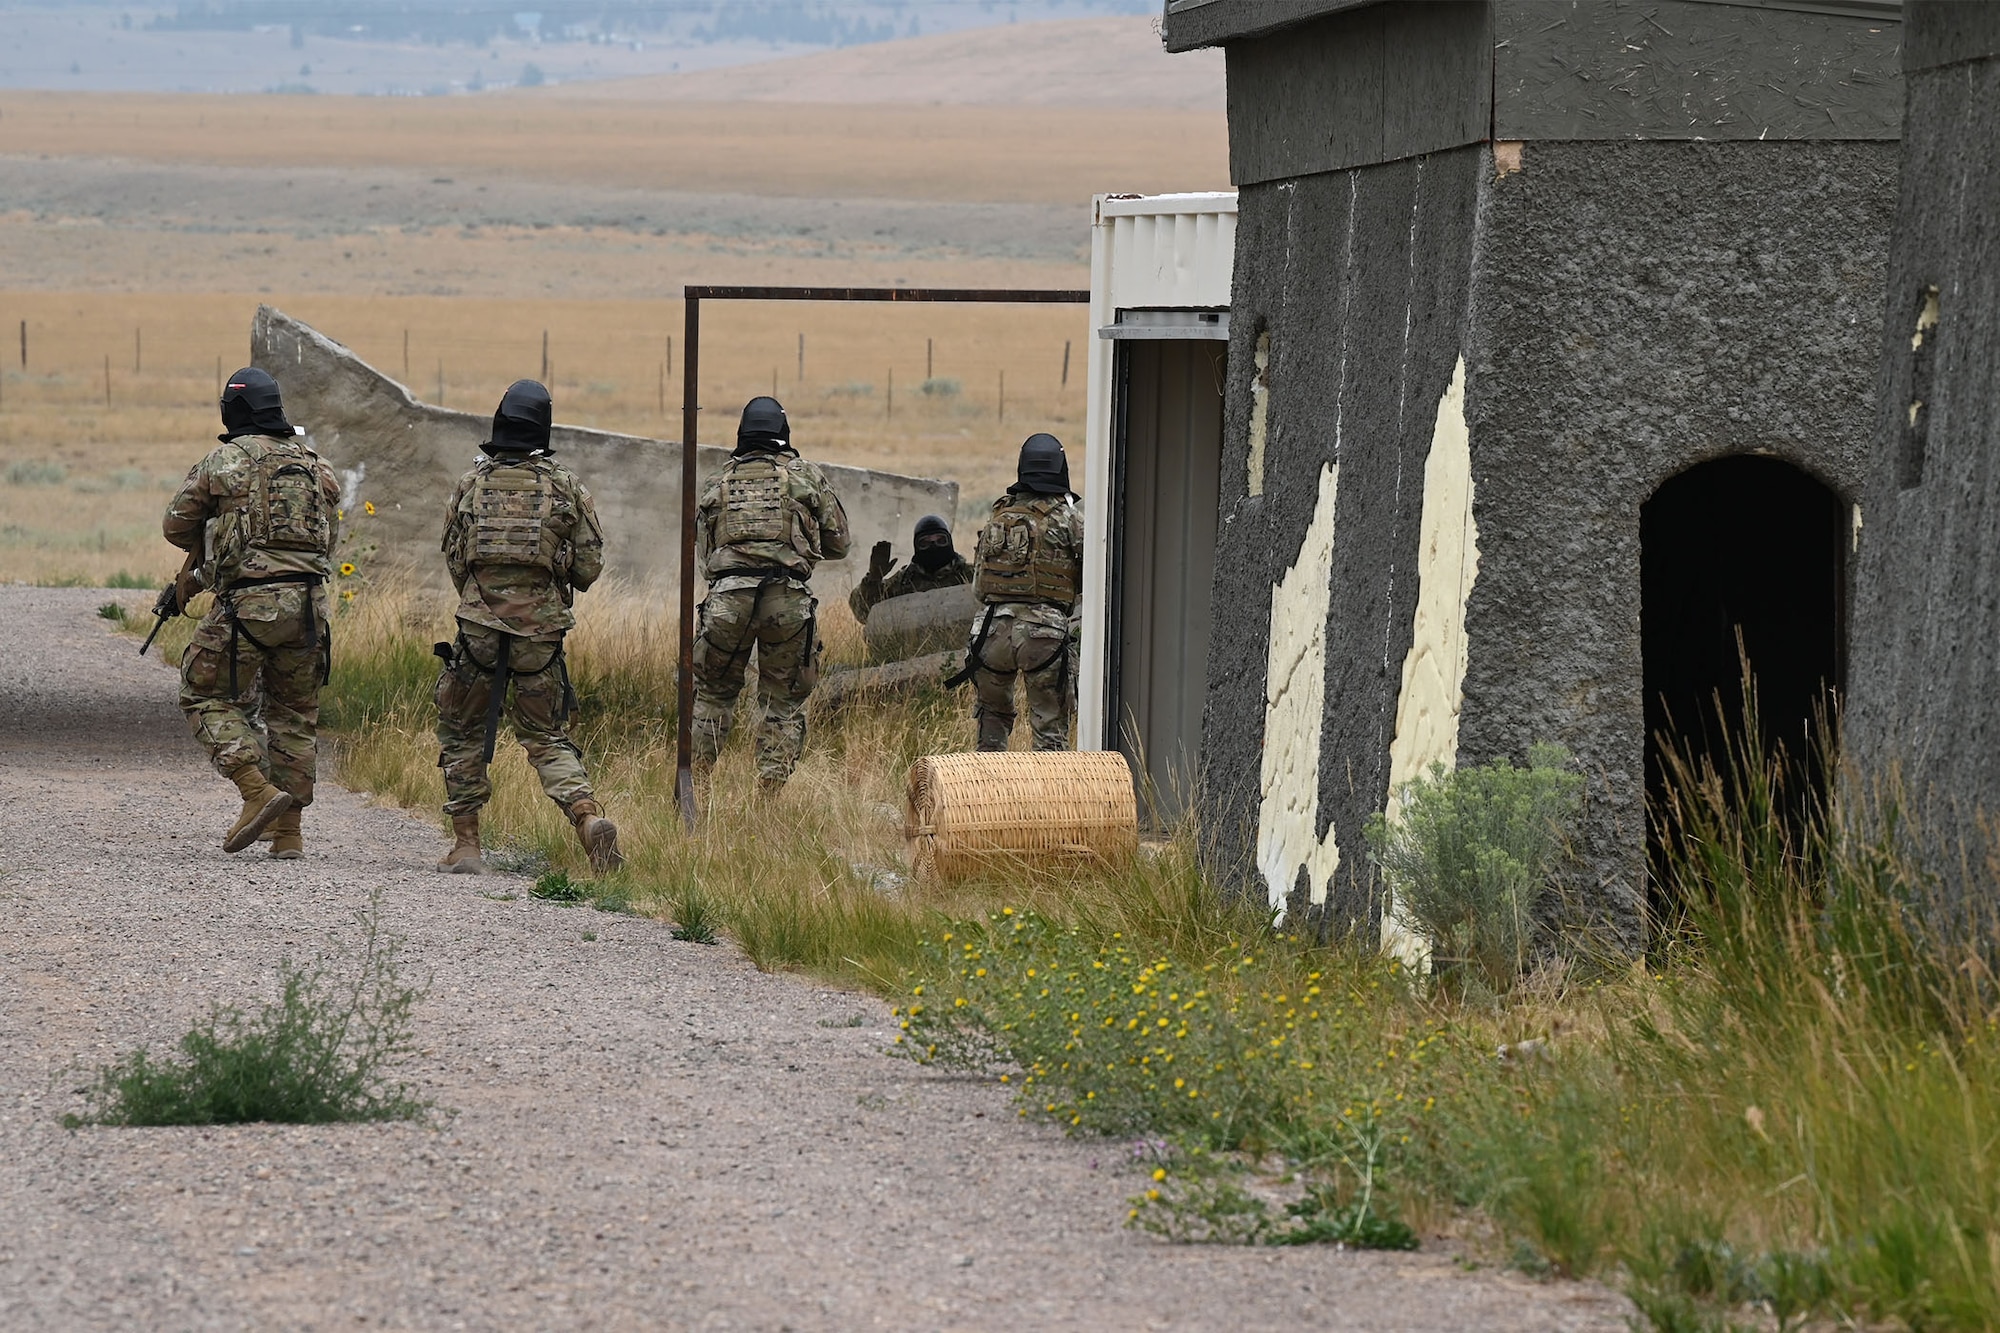 Defenders from the 841st Missile Security Forces Squadron navigate through a mock village during a training exercise Aug. 17, 2021, at the firing range on Fort Harrison, Mont. The exercise concluded with the simulated enemy combatants’ surrender, resulting from the unity and precision. (U.S. Air Force photo by Airman Elijah Van Zandt)